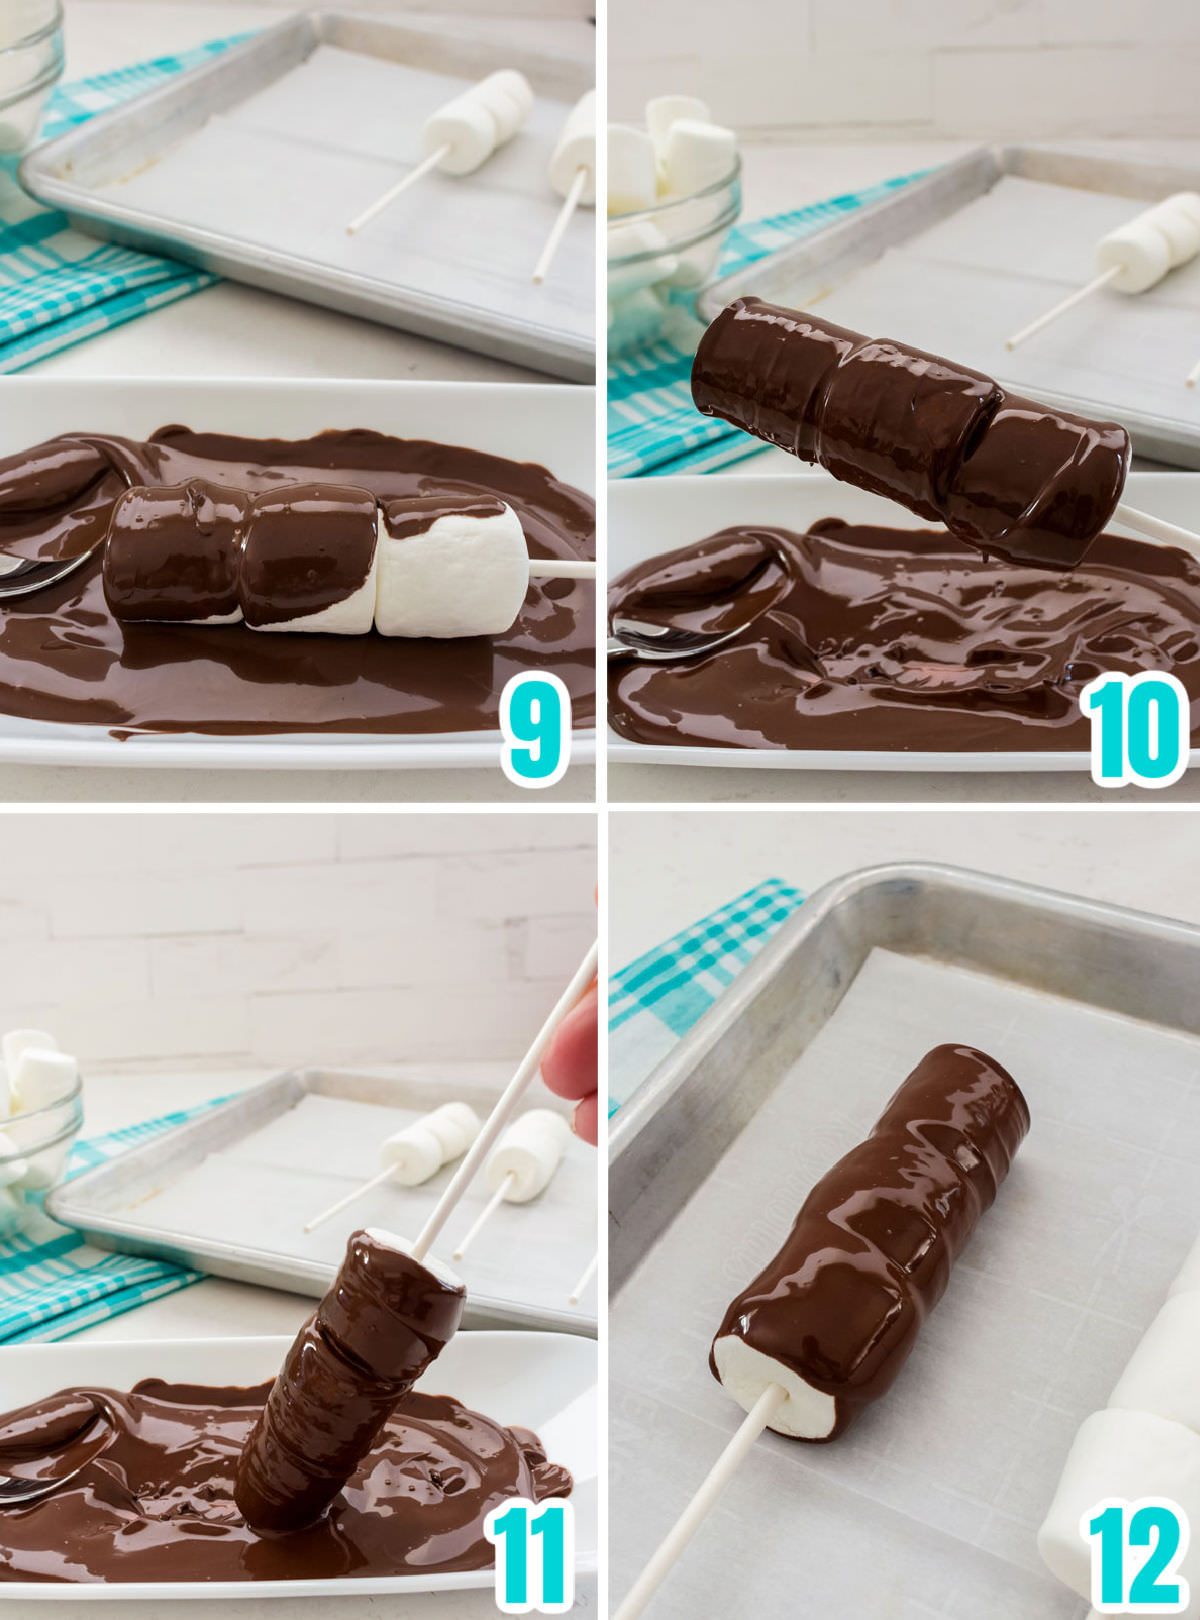 Collage image showing the steps for covering the marshmallows with chocolate.